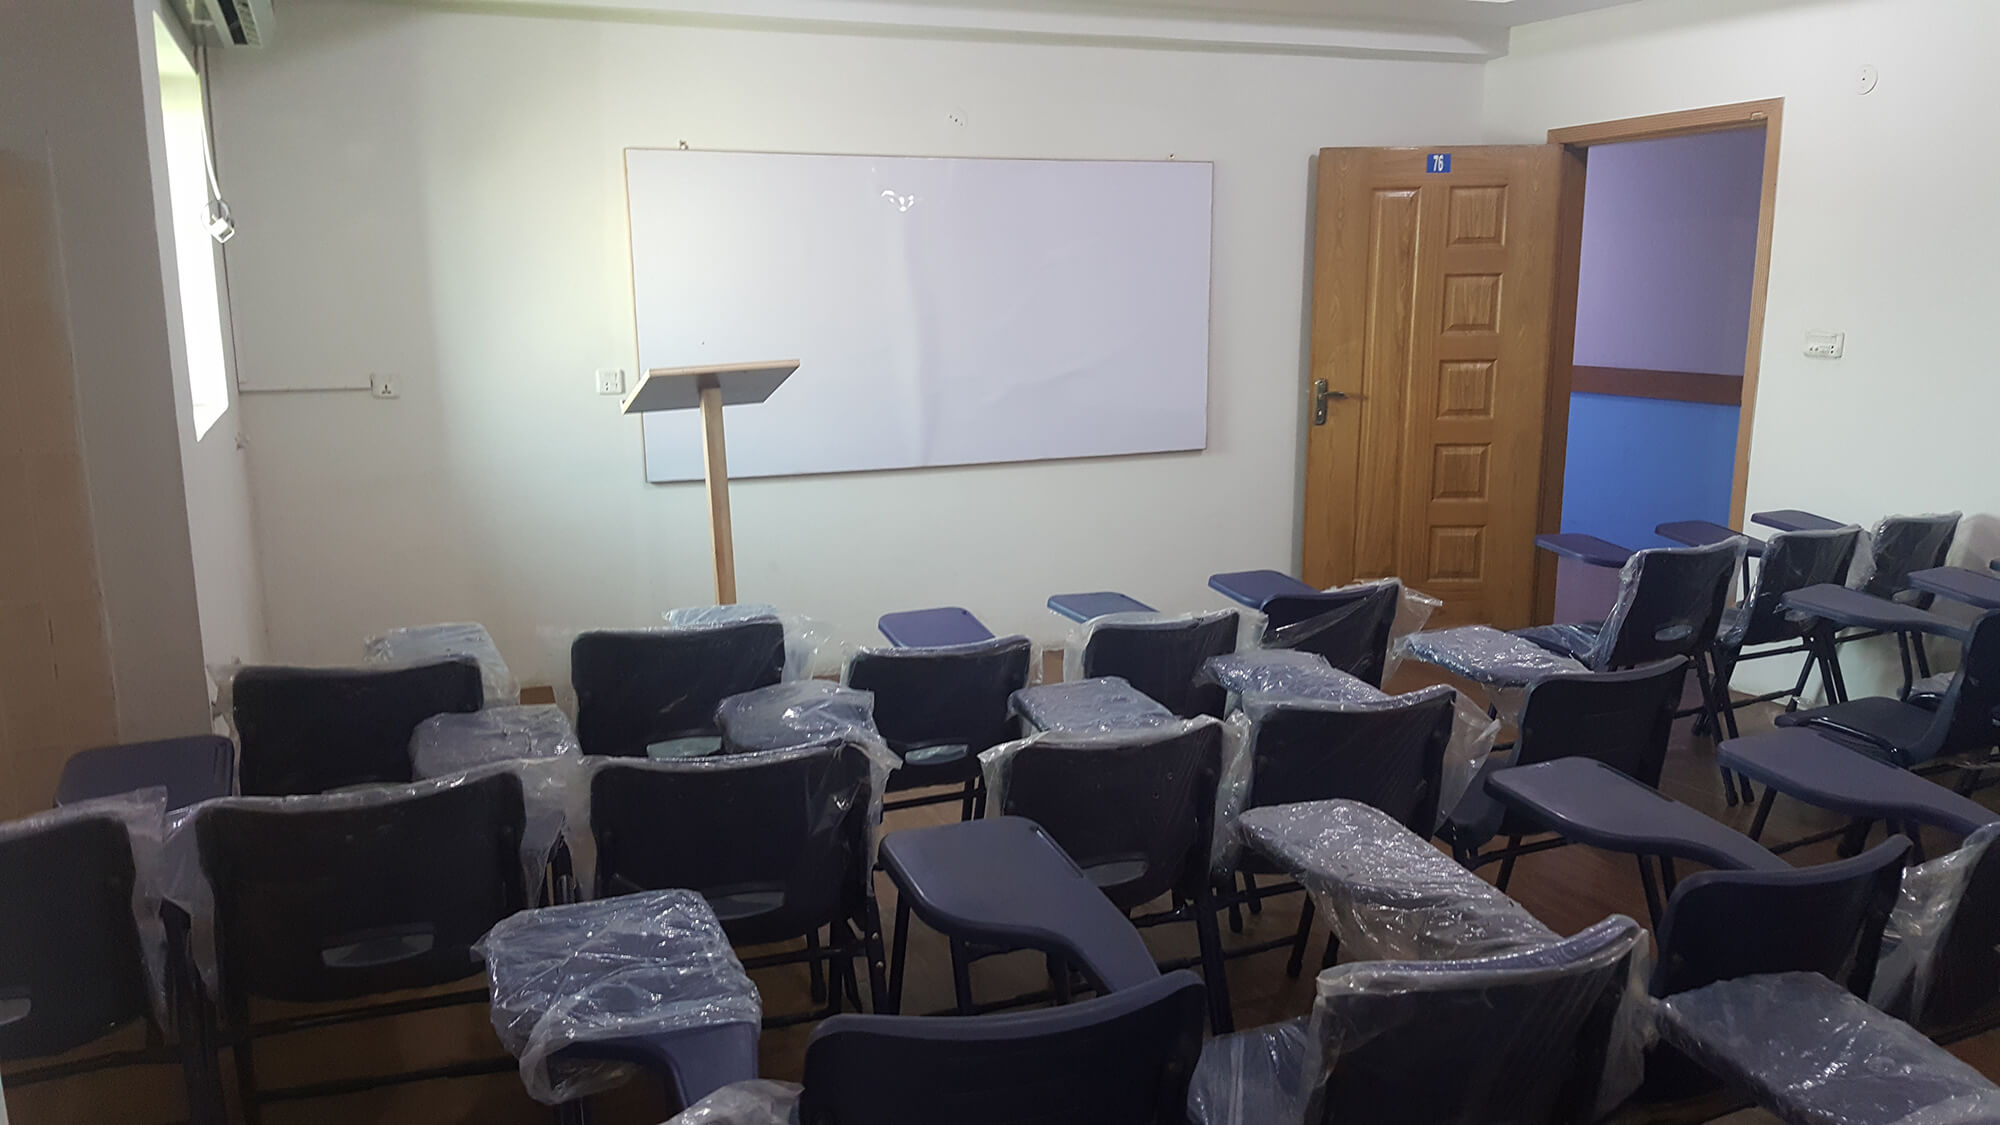 Lecture Halls 18